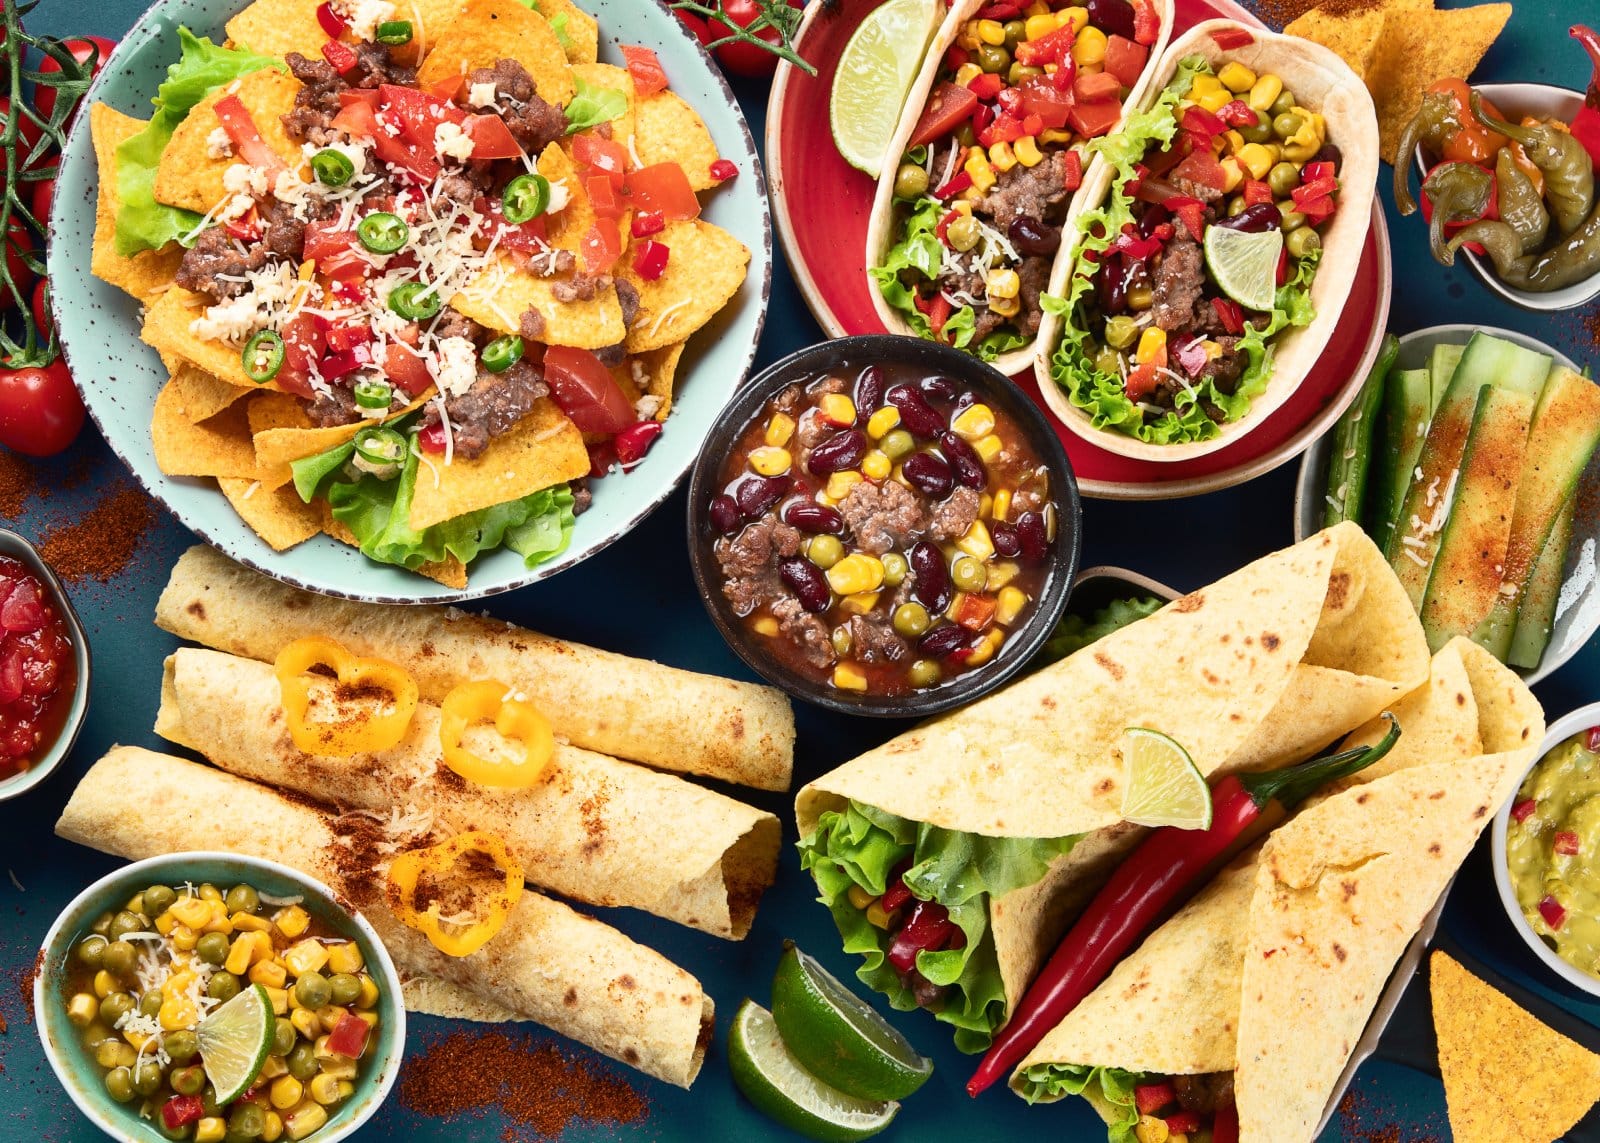 <p><span>Where else can you get authentic Tex-Mex that tantalizes your taste buds with flavors that are out of this world? From San Antonio’s enchiladas to Houston’s fajitas, expect to spend $10-$20 for a meal that’s a blend of Mexican and Texan flavors.</span></p>